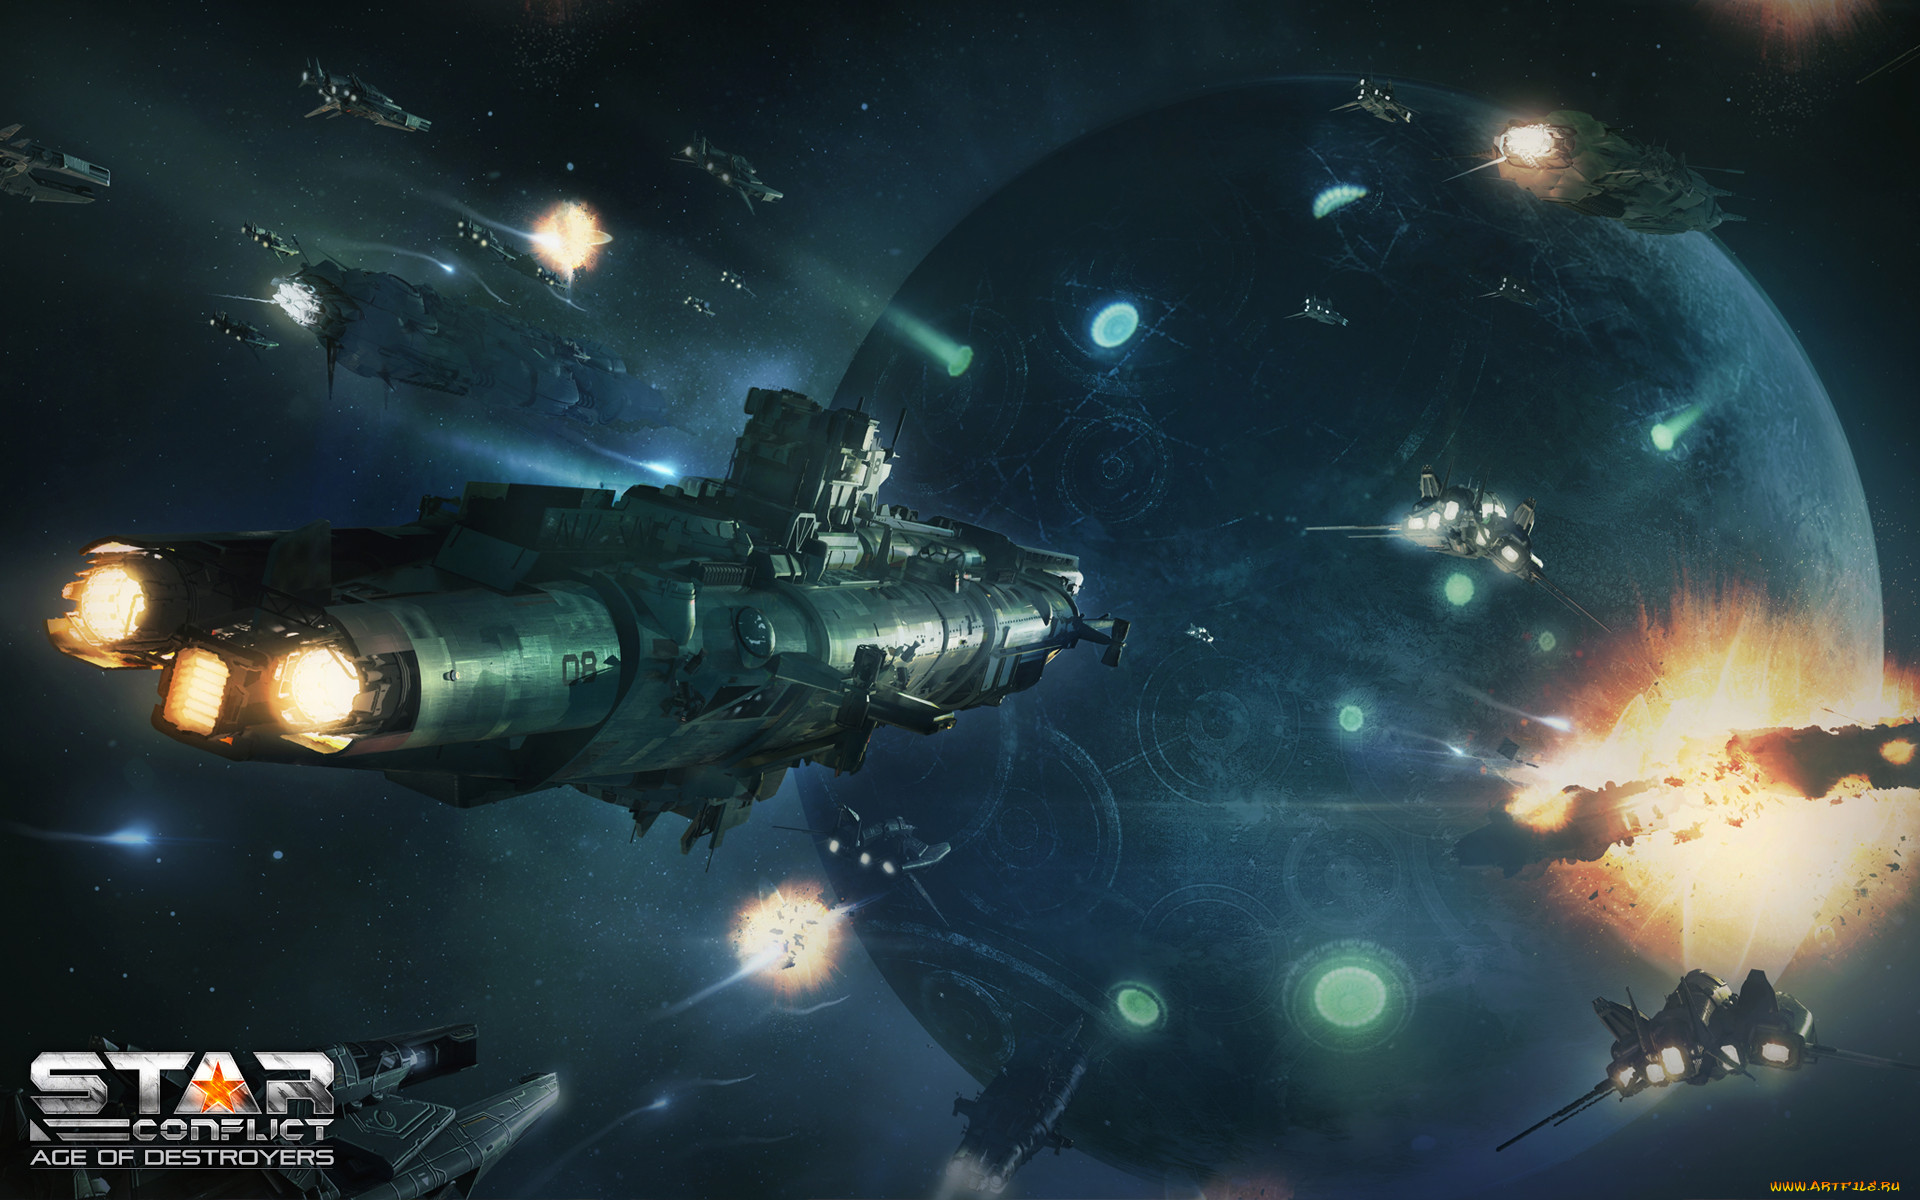 star conflict, age of destroyers,  ,  age of destroyers, action, , age, of, destroyers, star, conflict